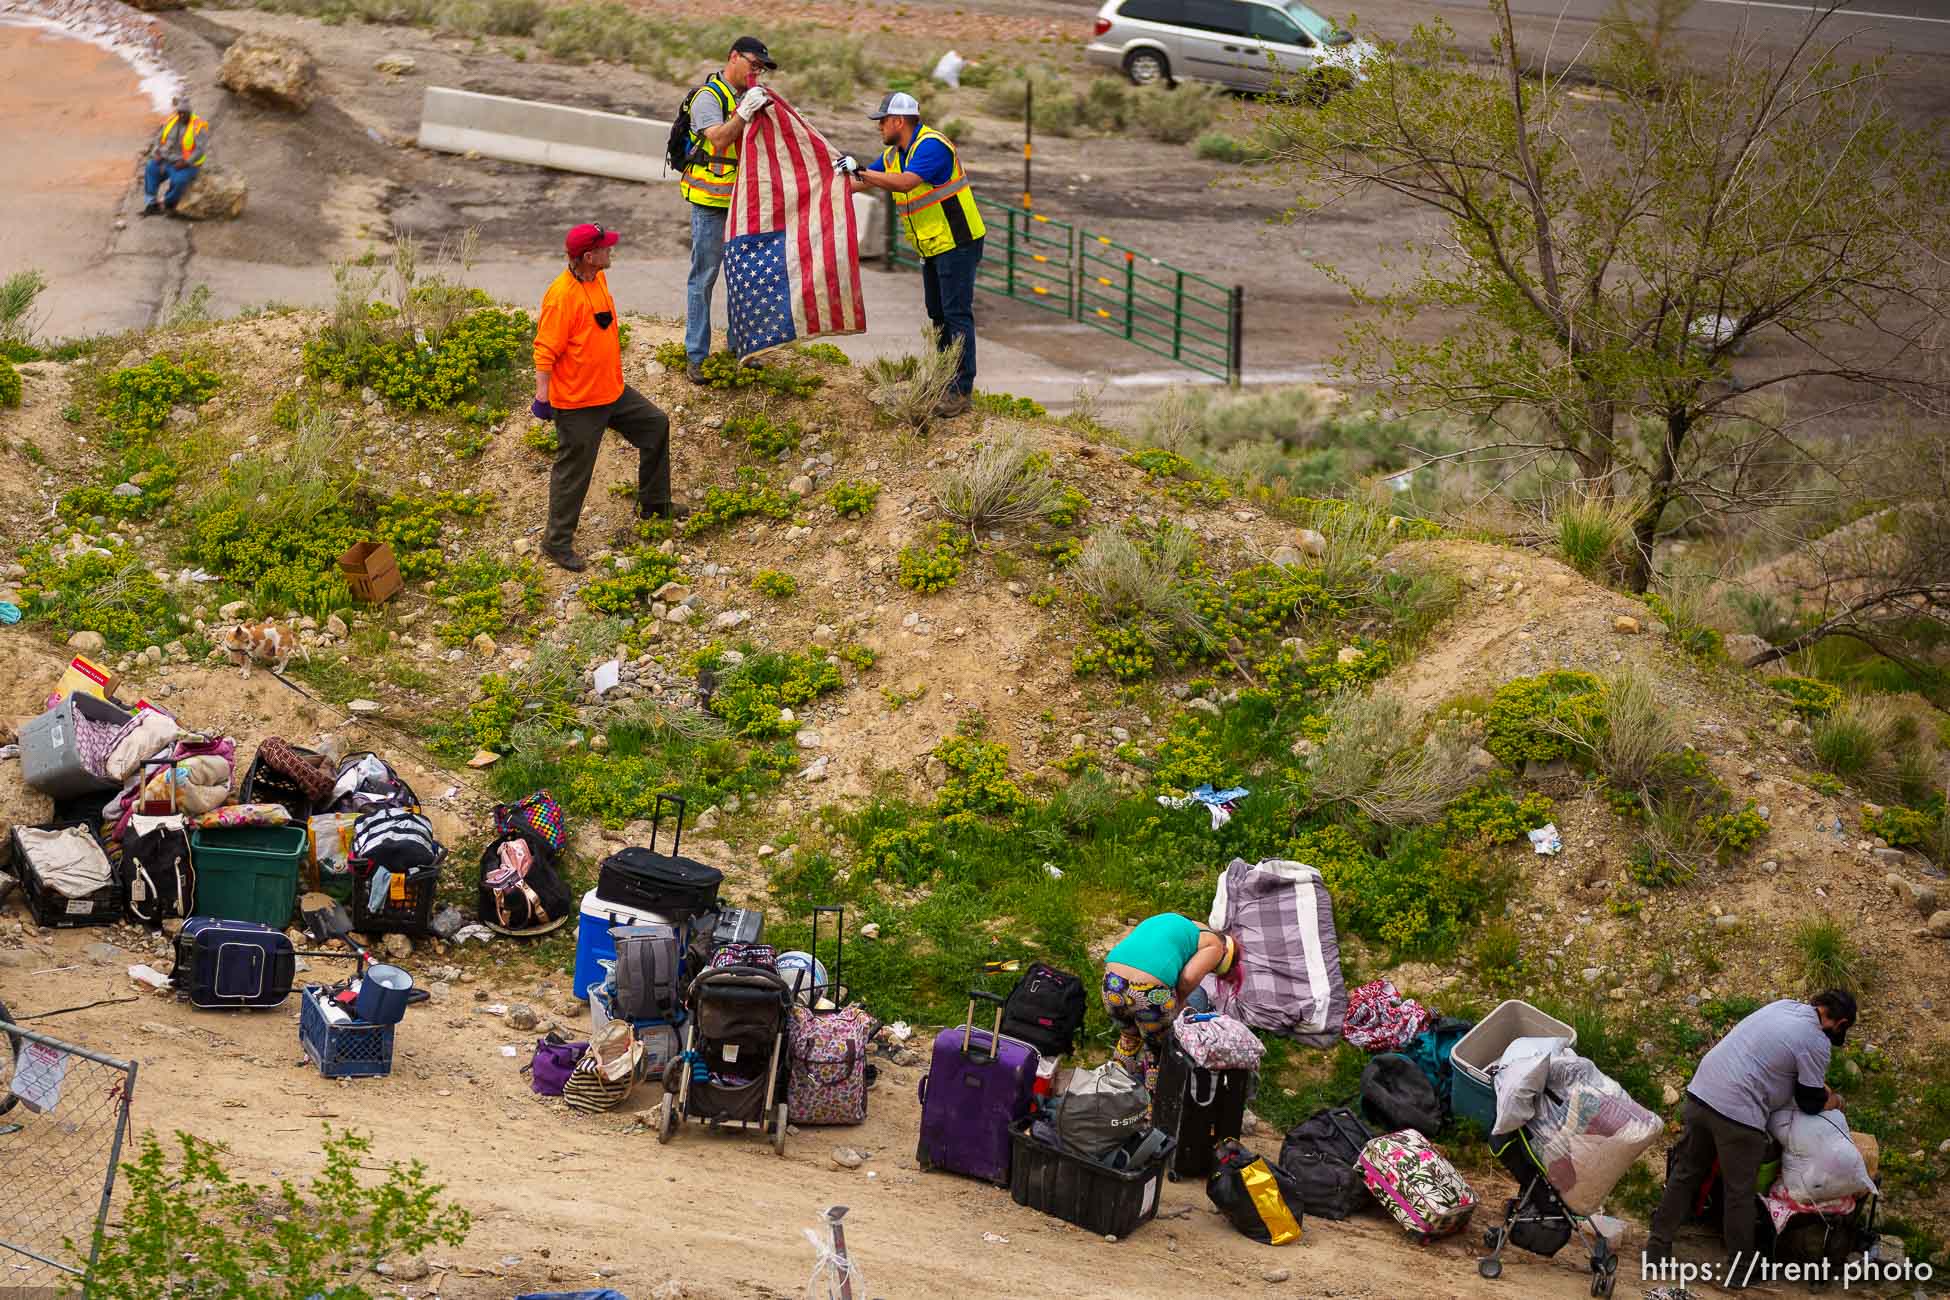 (Trent Nelson  |  The Salt Lake Tribune) A flag is folded by workers as people in camps pack up their belongings in the foothills north of Salt Lake City on Wednesday, April 27, 2022.